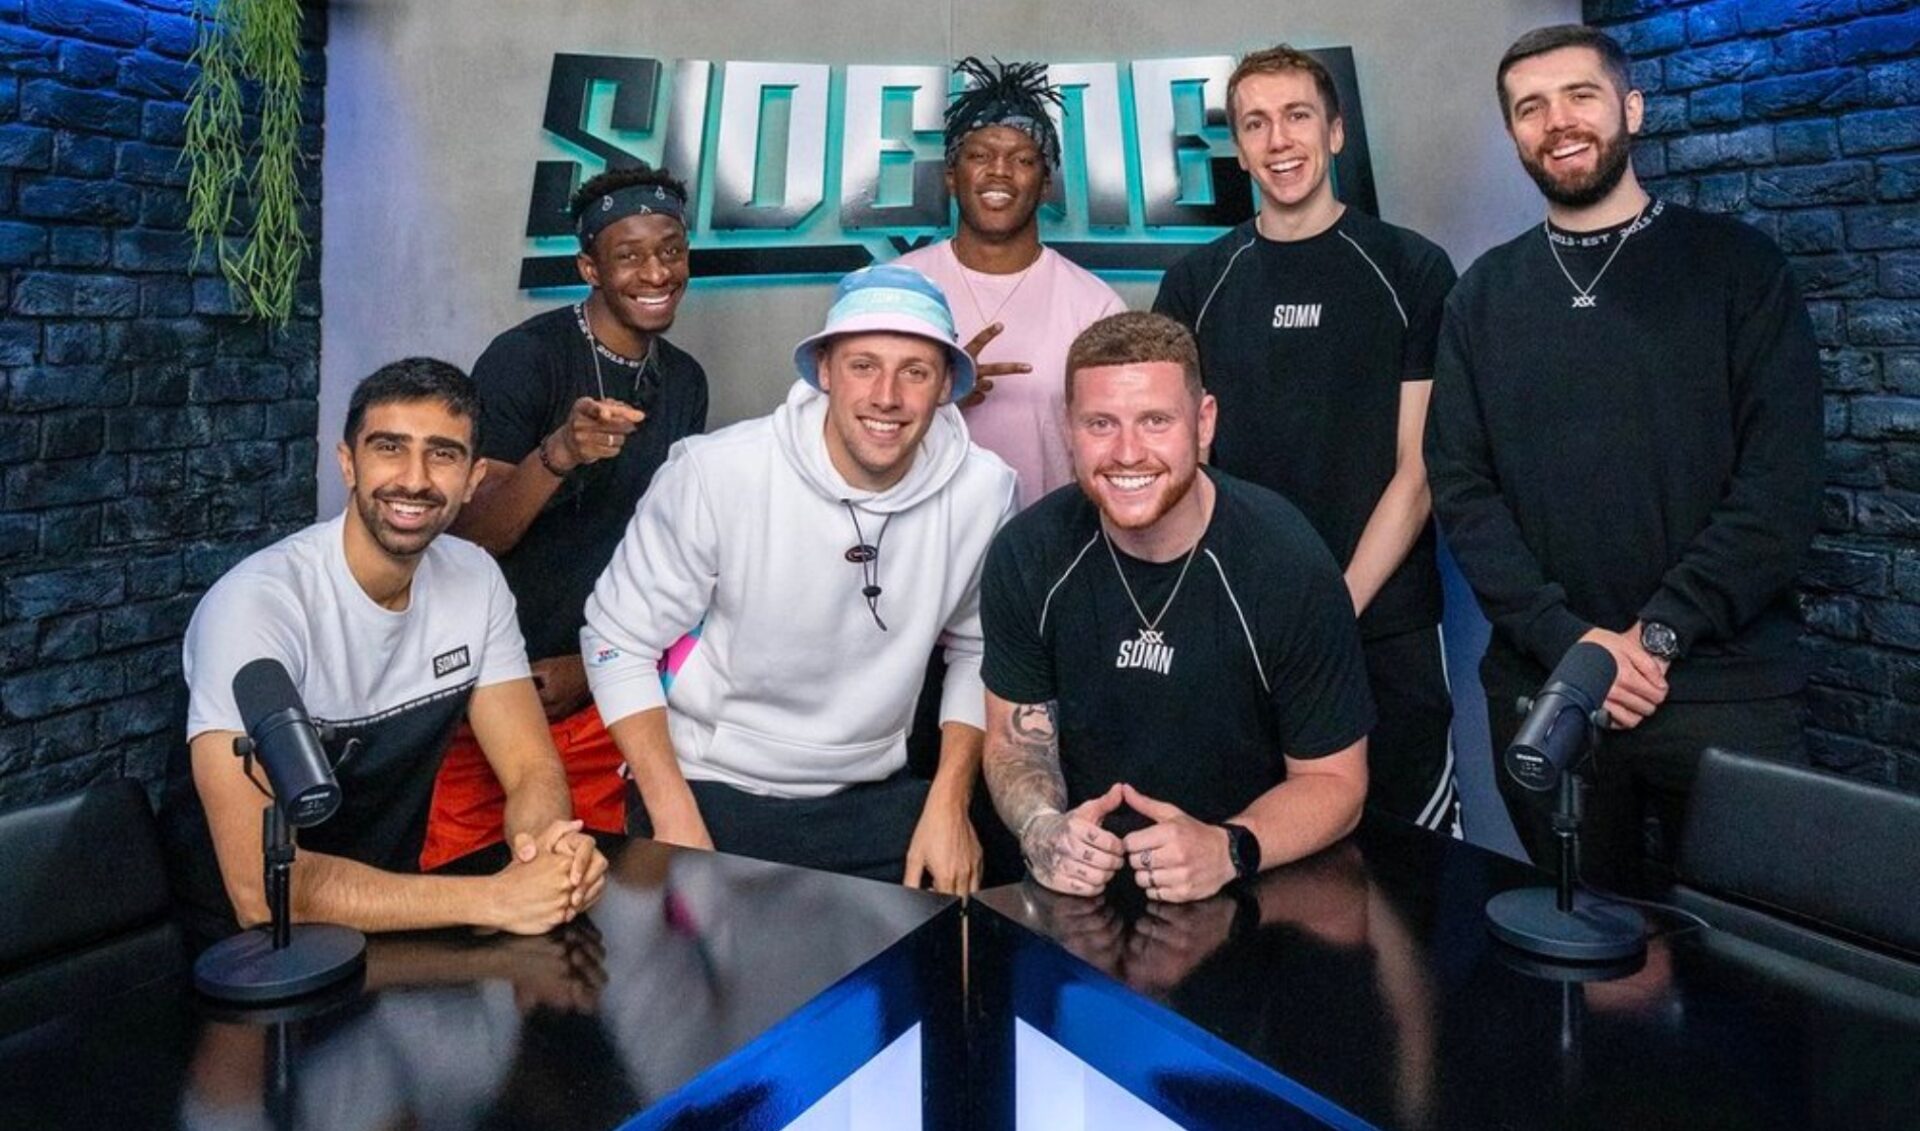 The Sidemen are growing fast. A “multi-million-pound deal” will help them keep it up.